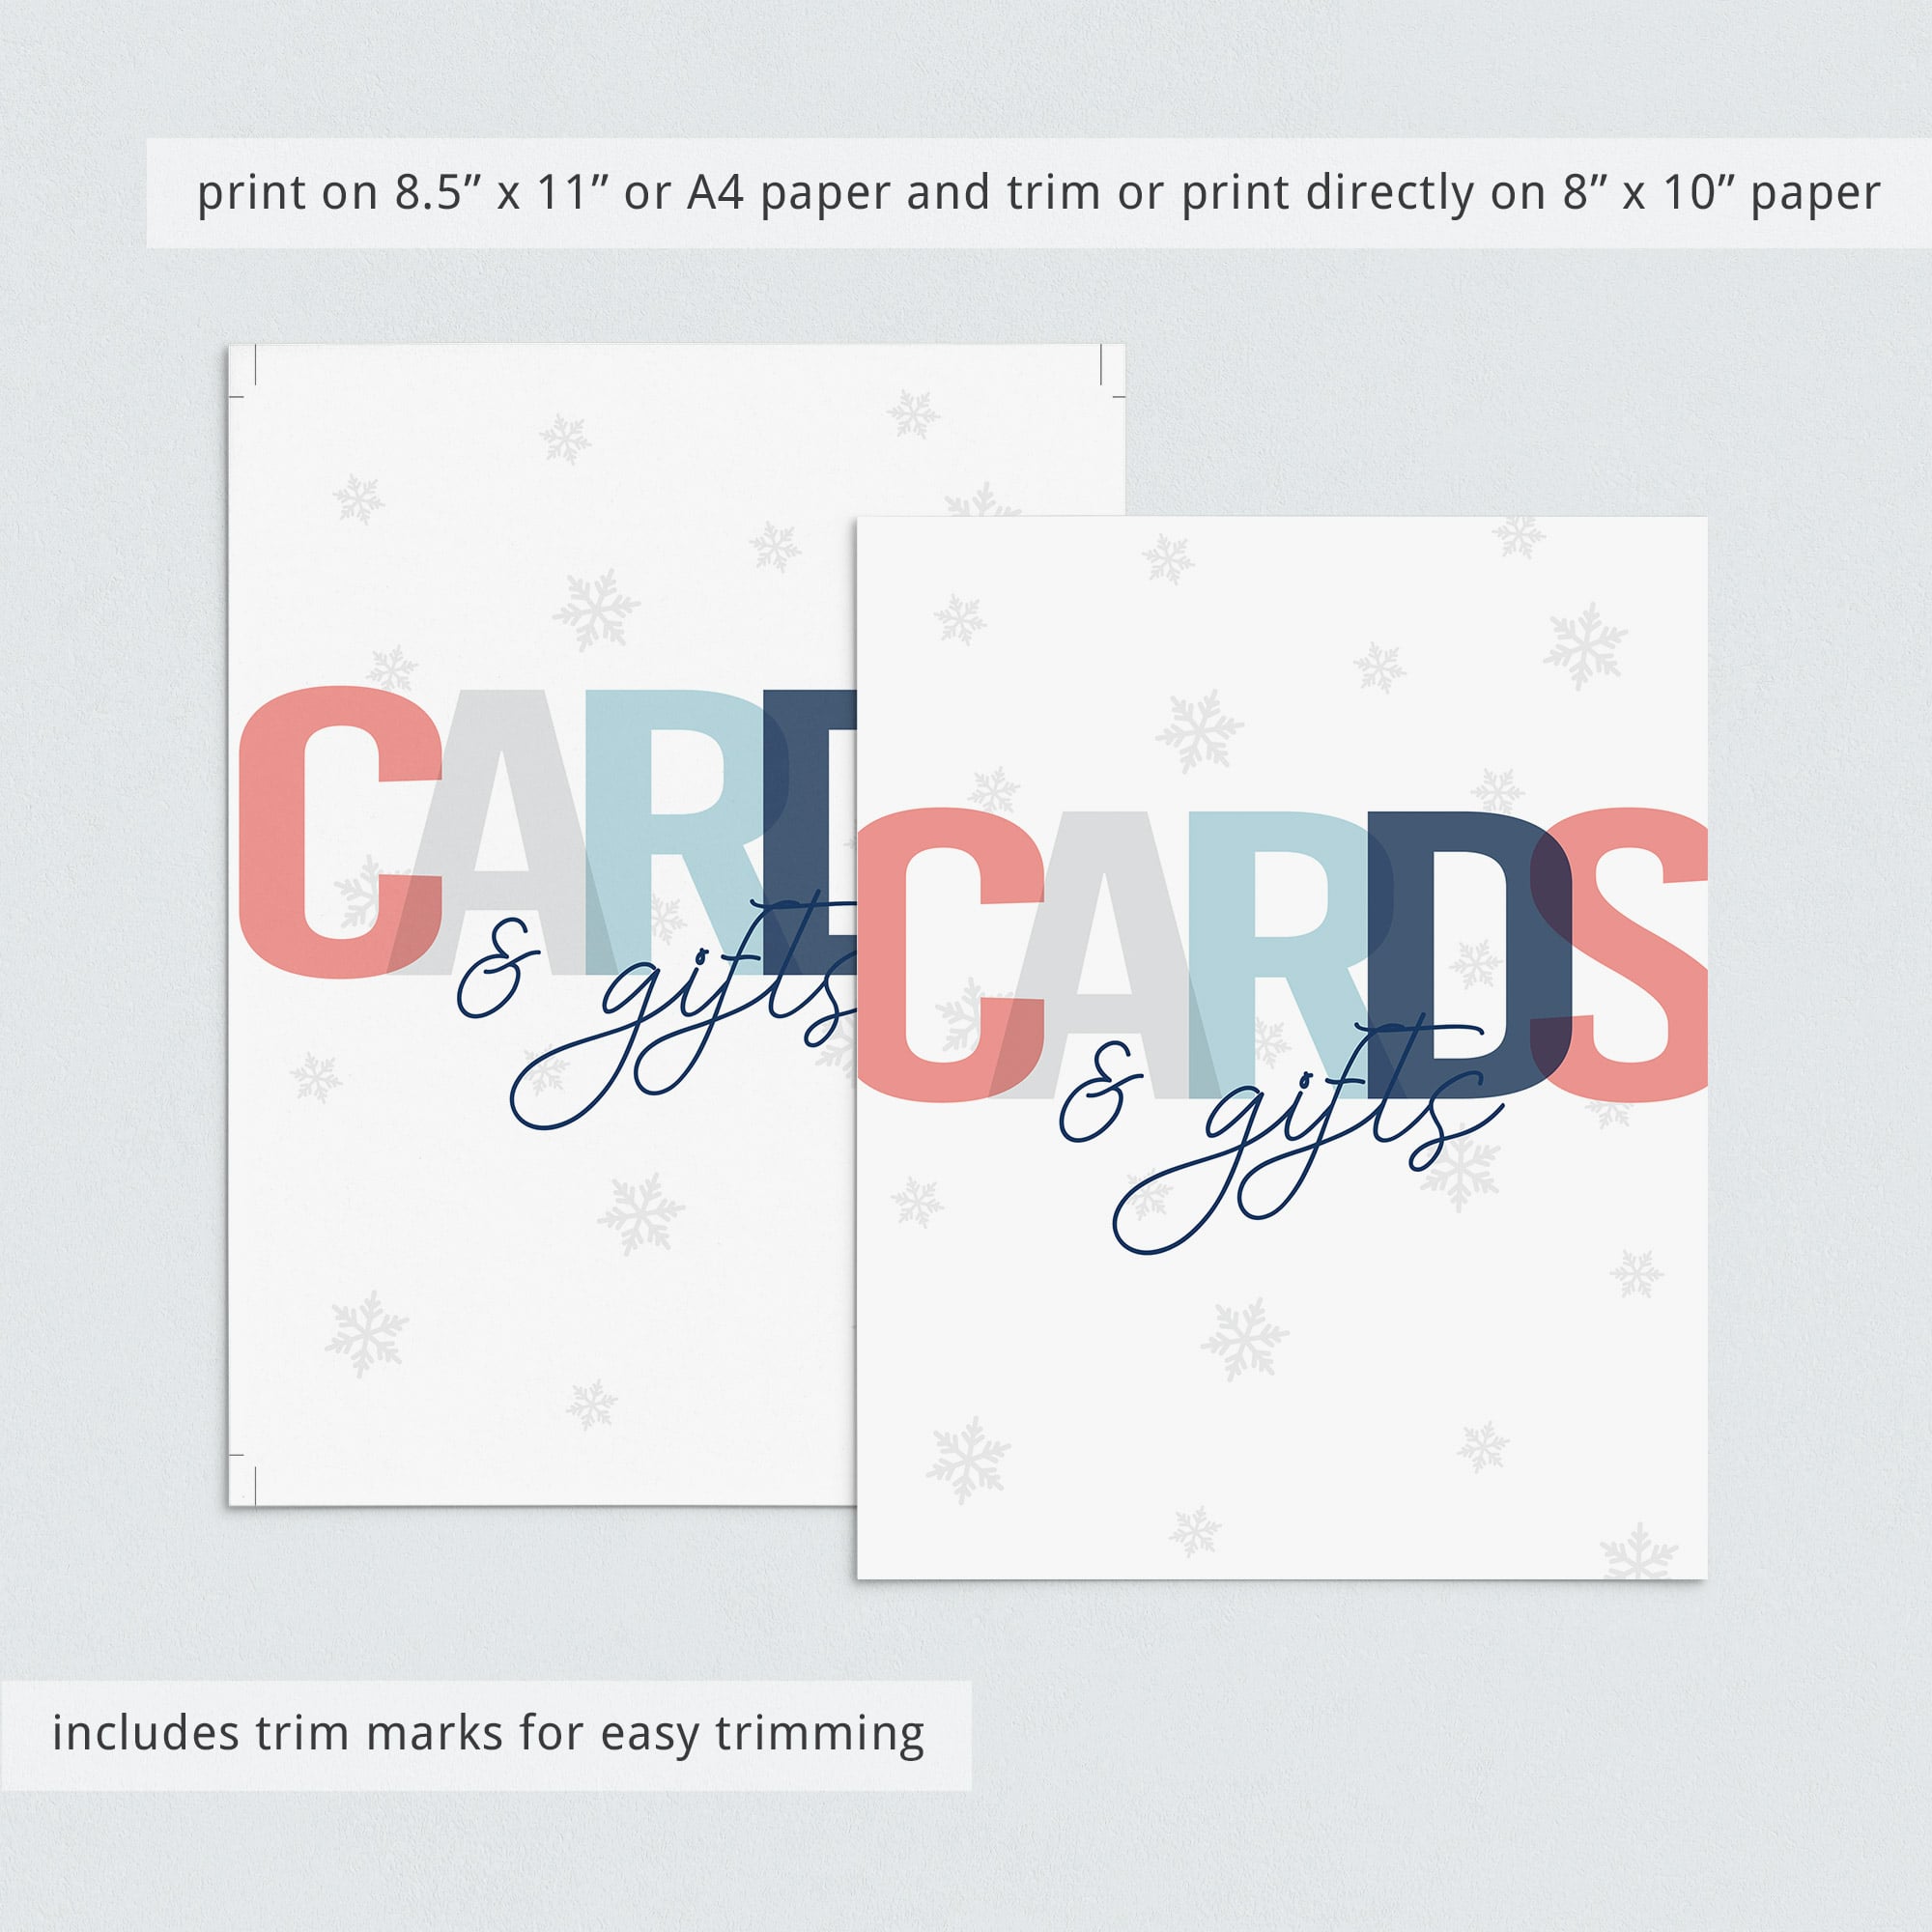 Printable sign for cards and gifts winter themed by LittleSizzle